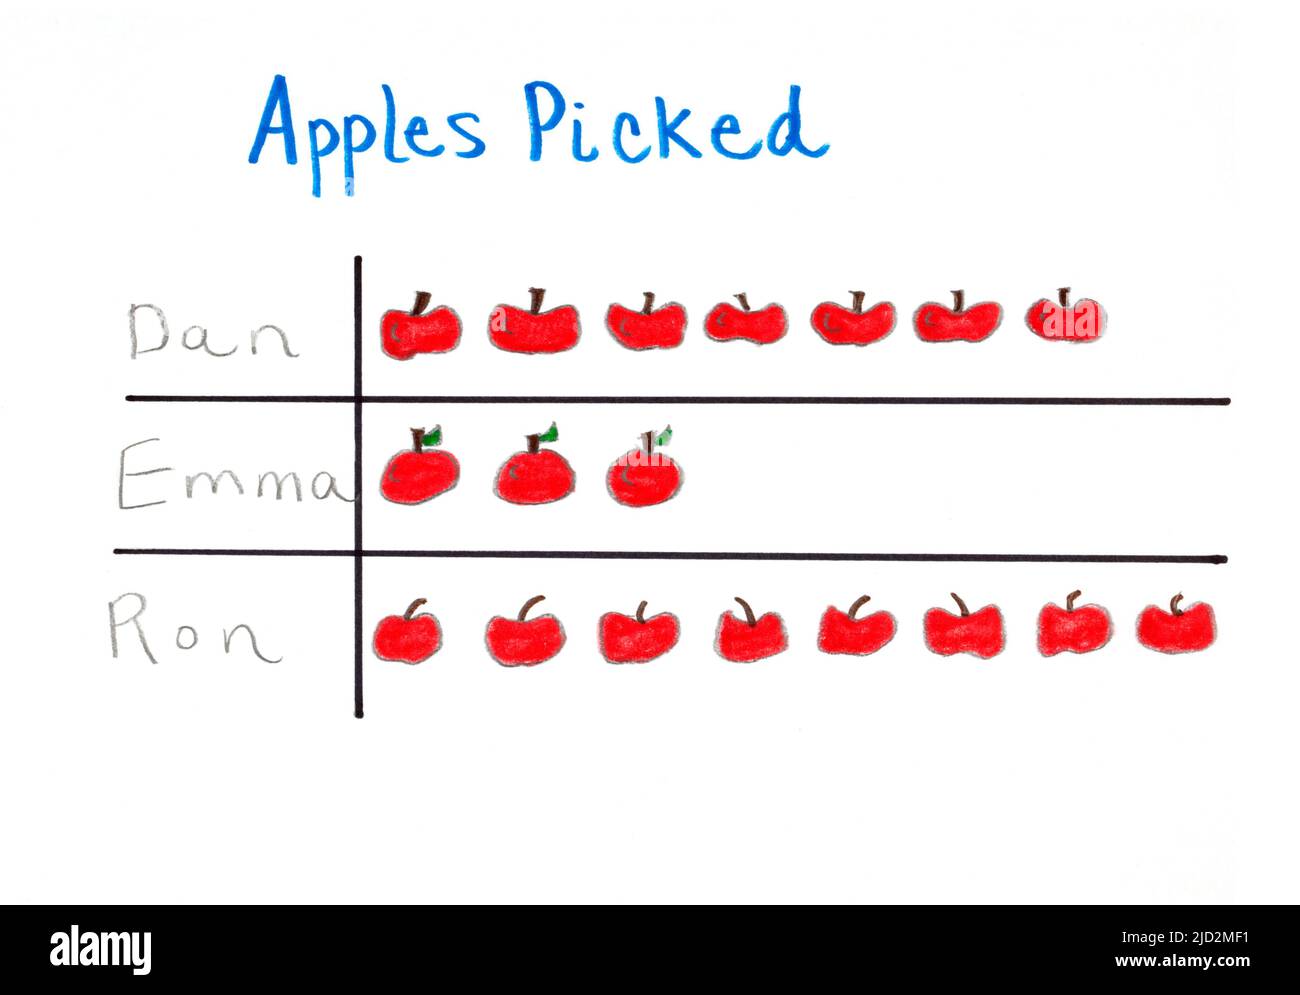 A child’s pictograph or pictogram graph and chart displaying a data set of the number of apples picked by three people. Stock Photo